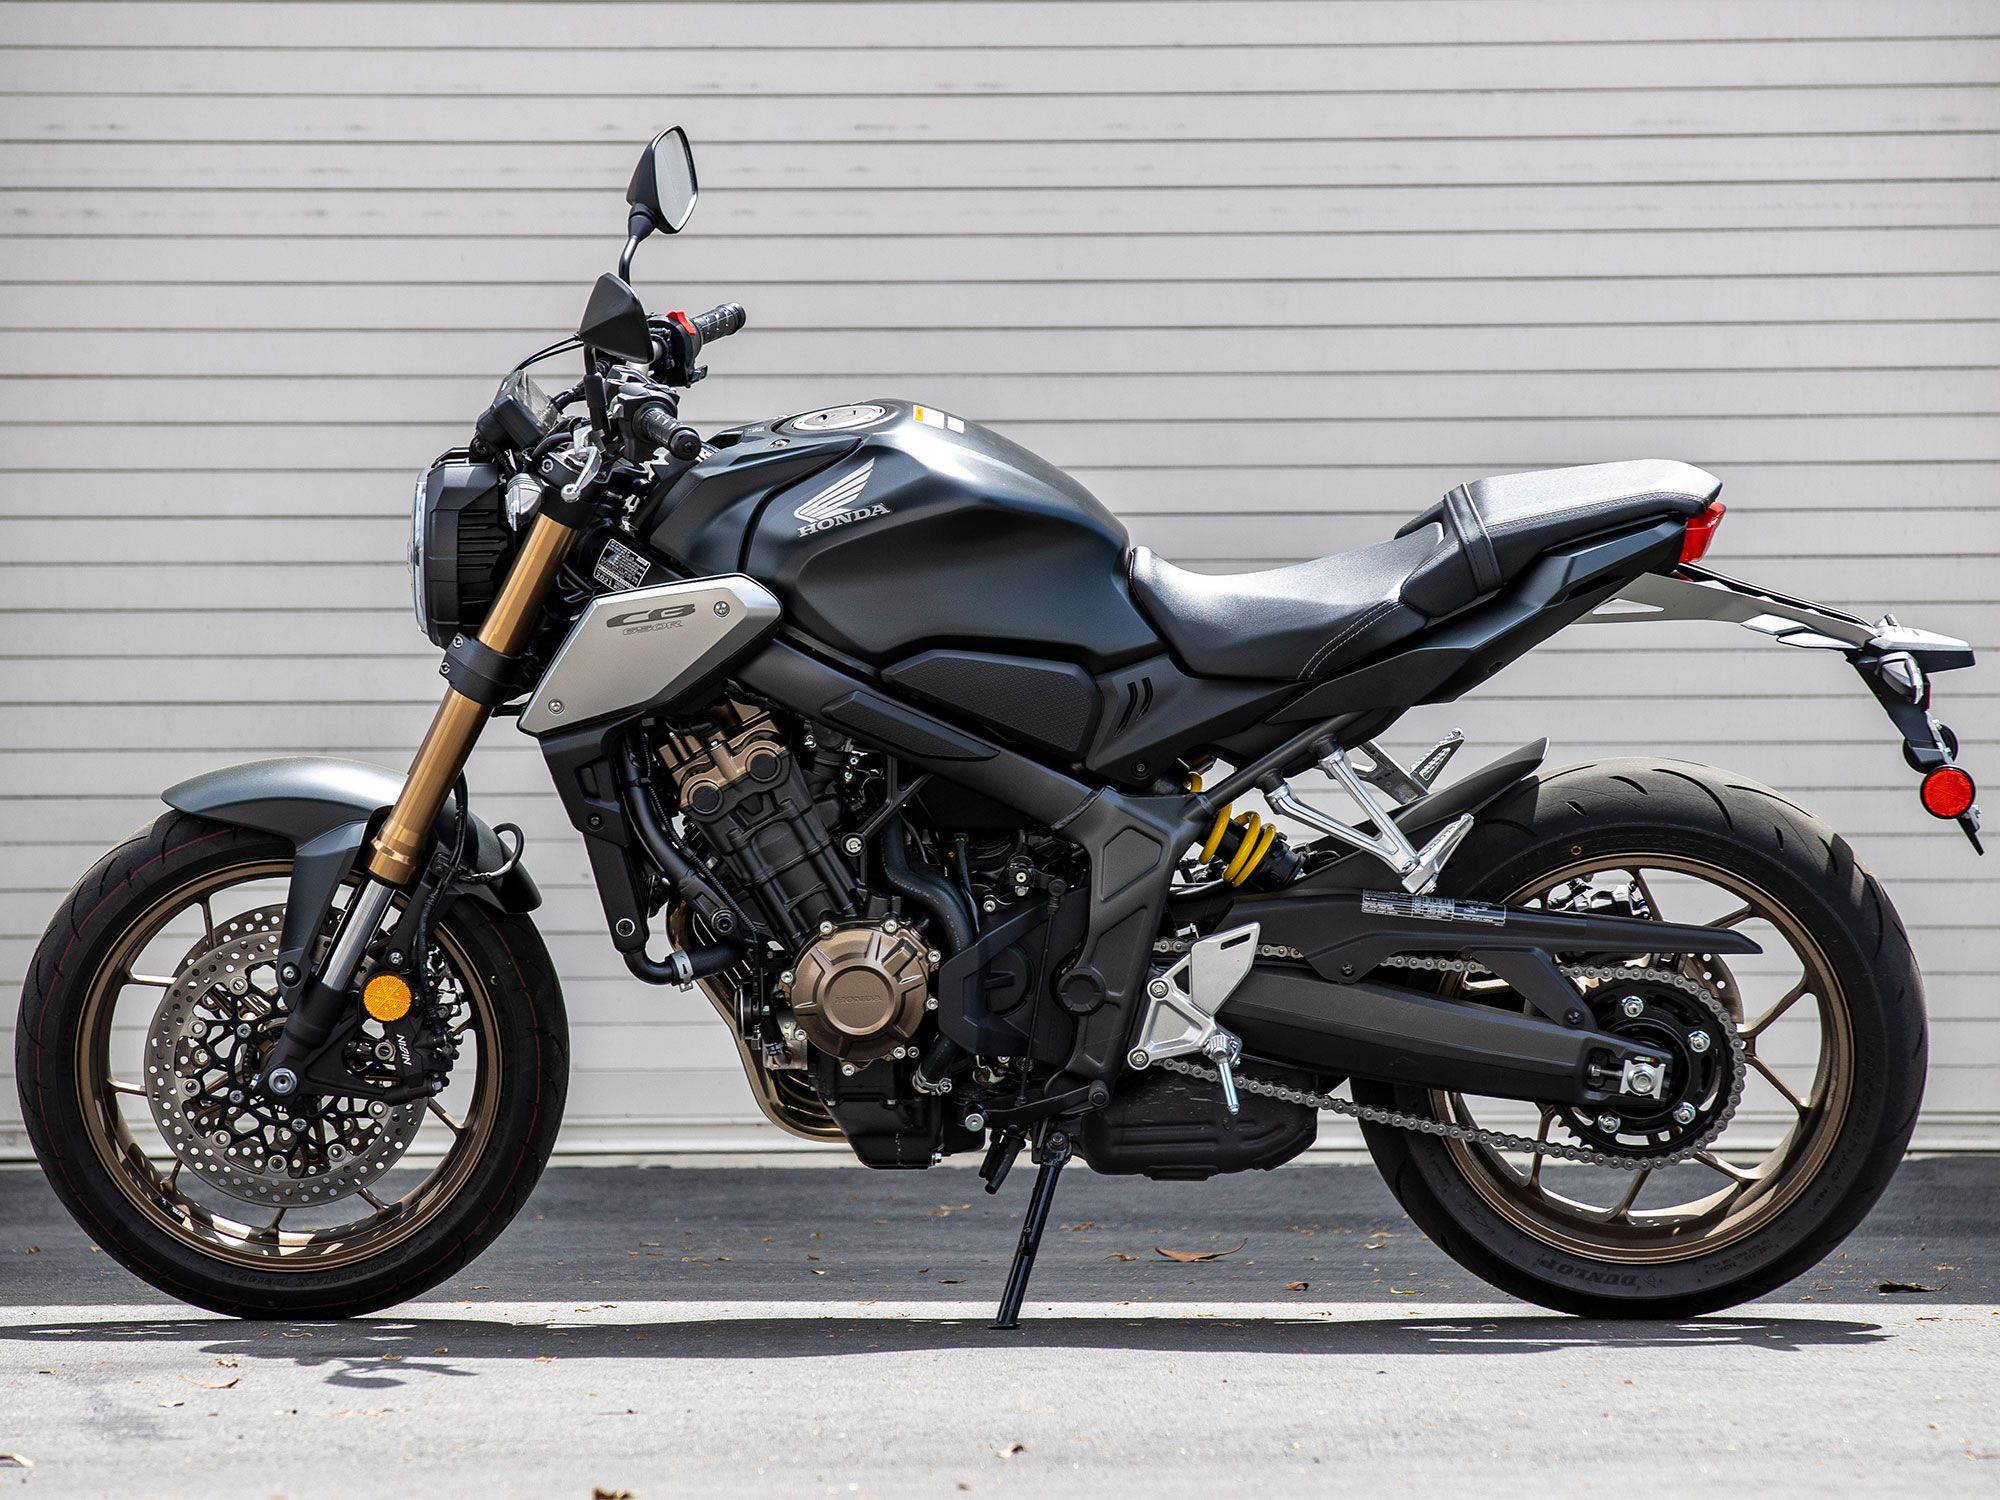 The 2021 CB650R is an approachable middleweight option for the Honda enthusiast. At $9,199, it may not exactly be a budget option, but is no stranger to Honda’s premium fit and finish.